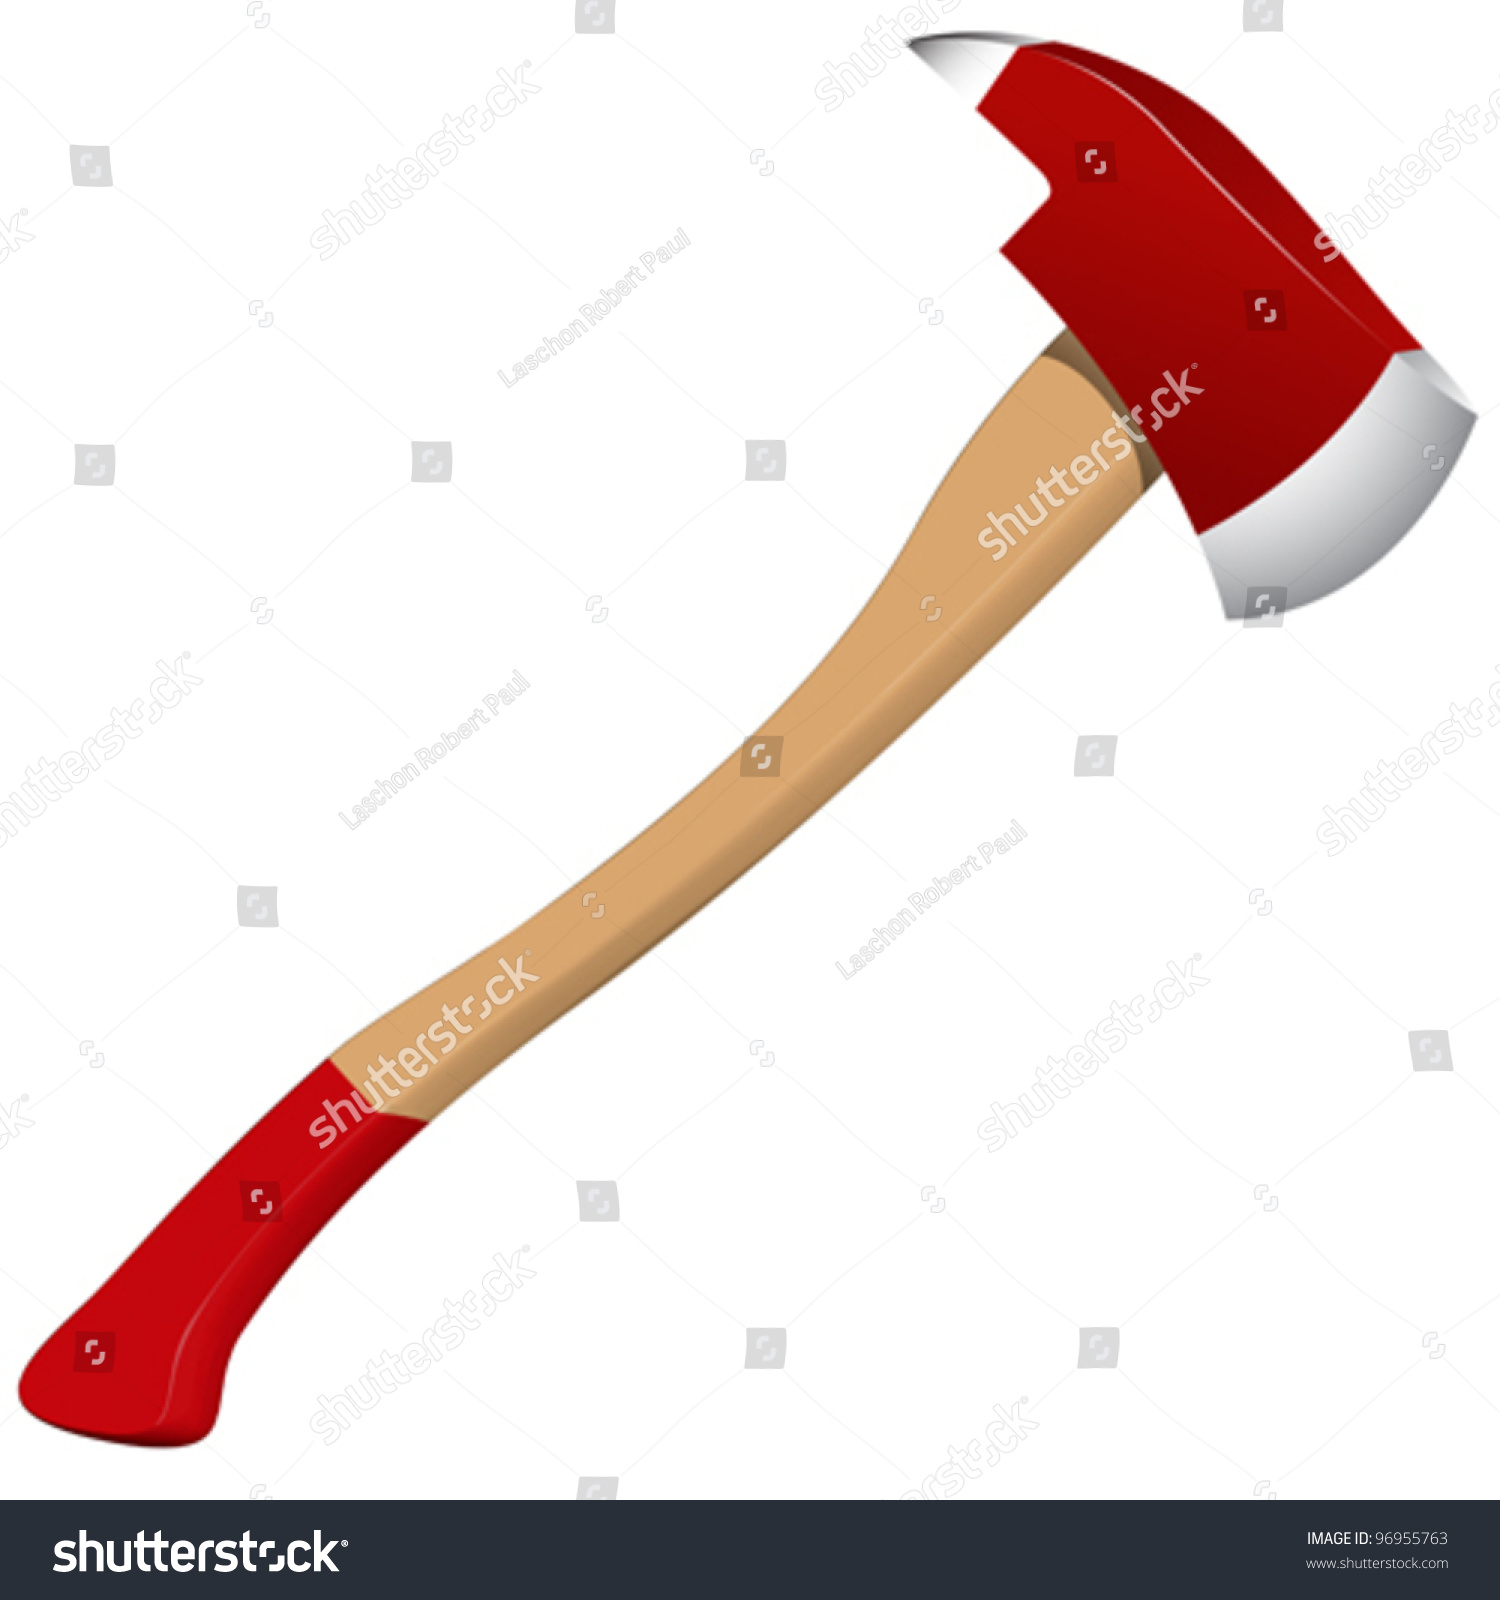 Firefighter Axe Against White Background, Abstract Vector Art